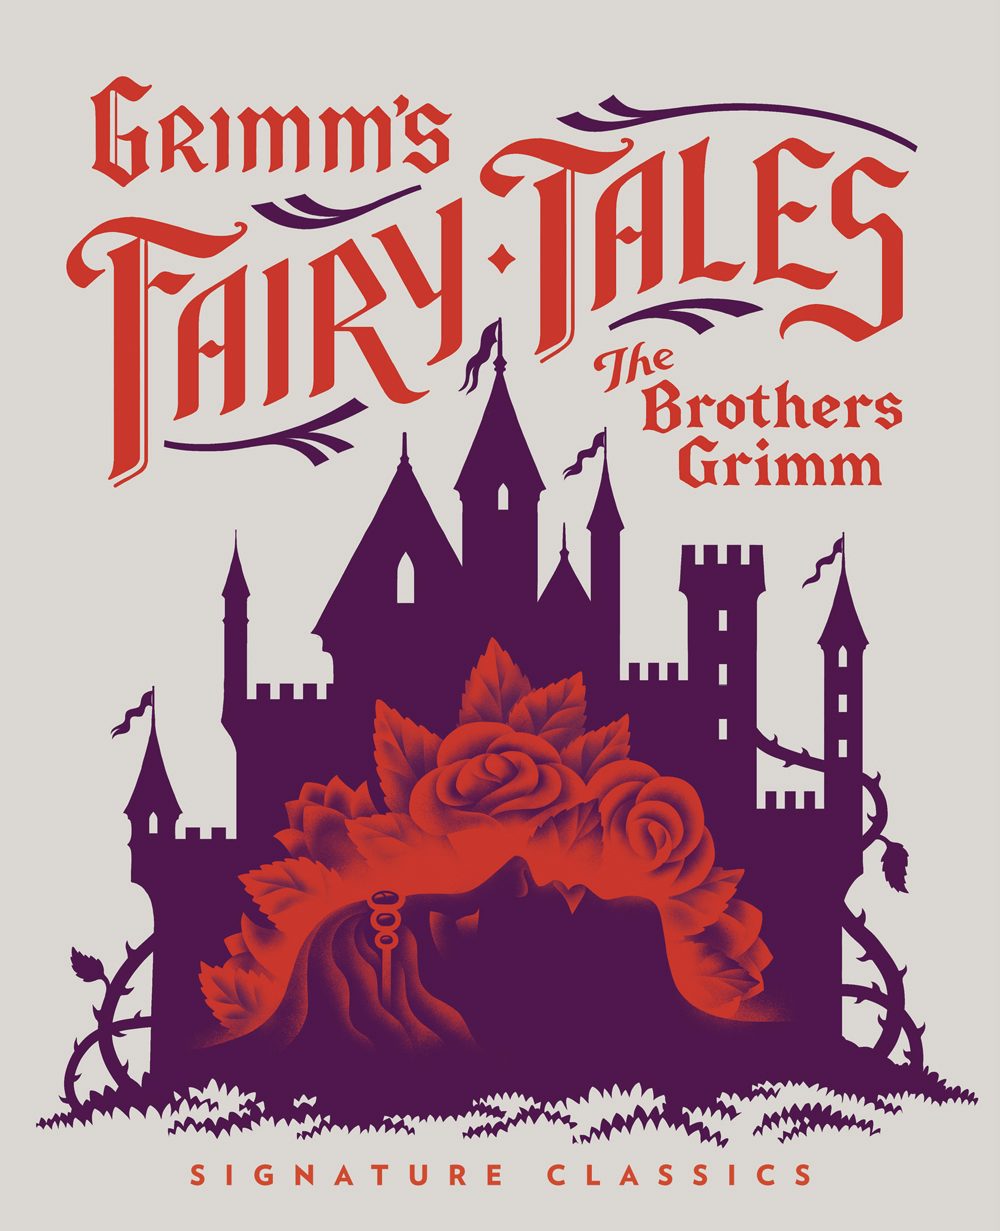 GRIMM’S FAIRY TALES(H)/UNION SQUARE & CO. (USA)./GRIMM BROTHERS